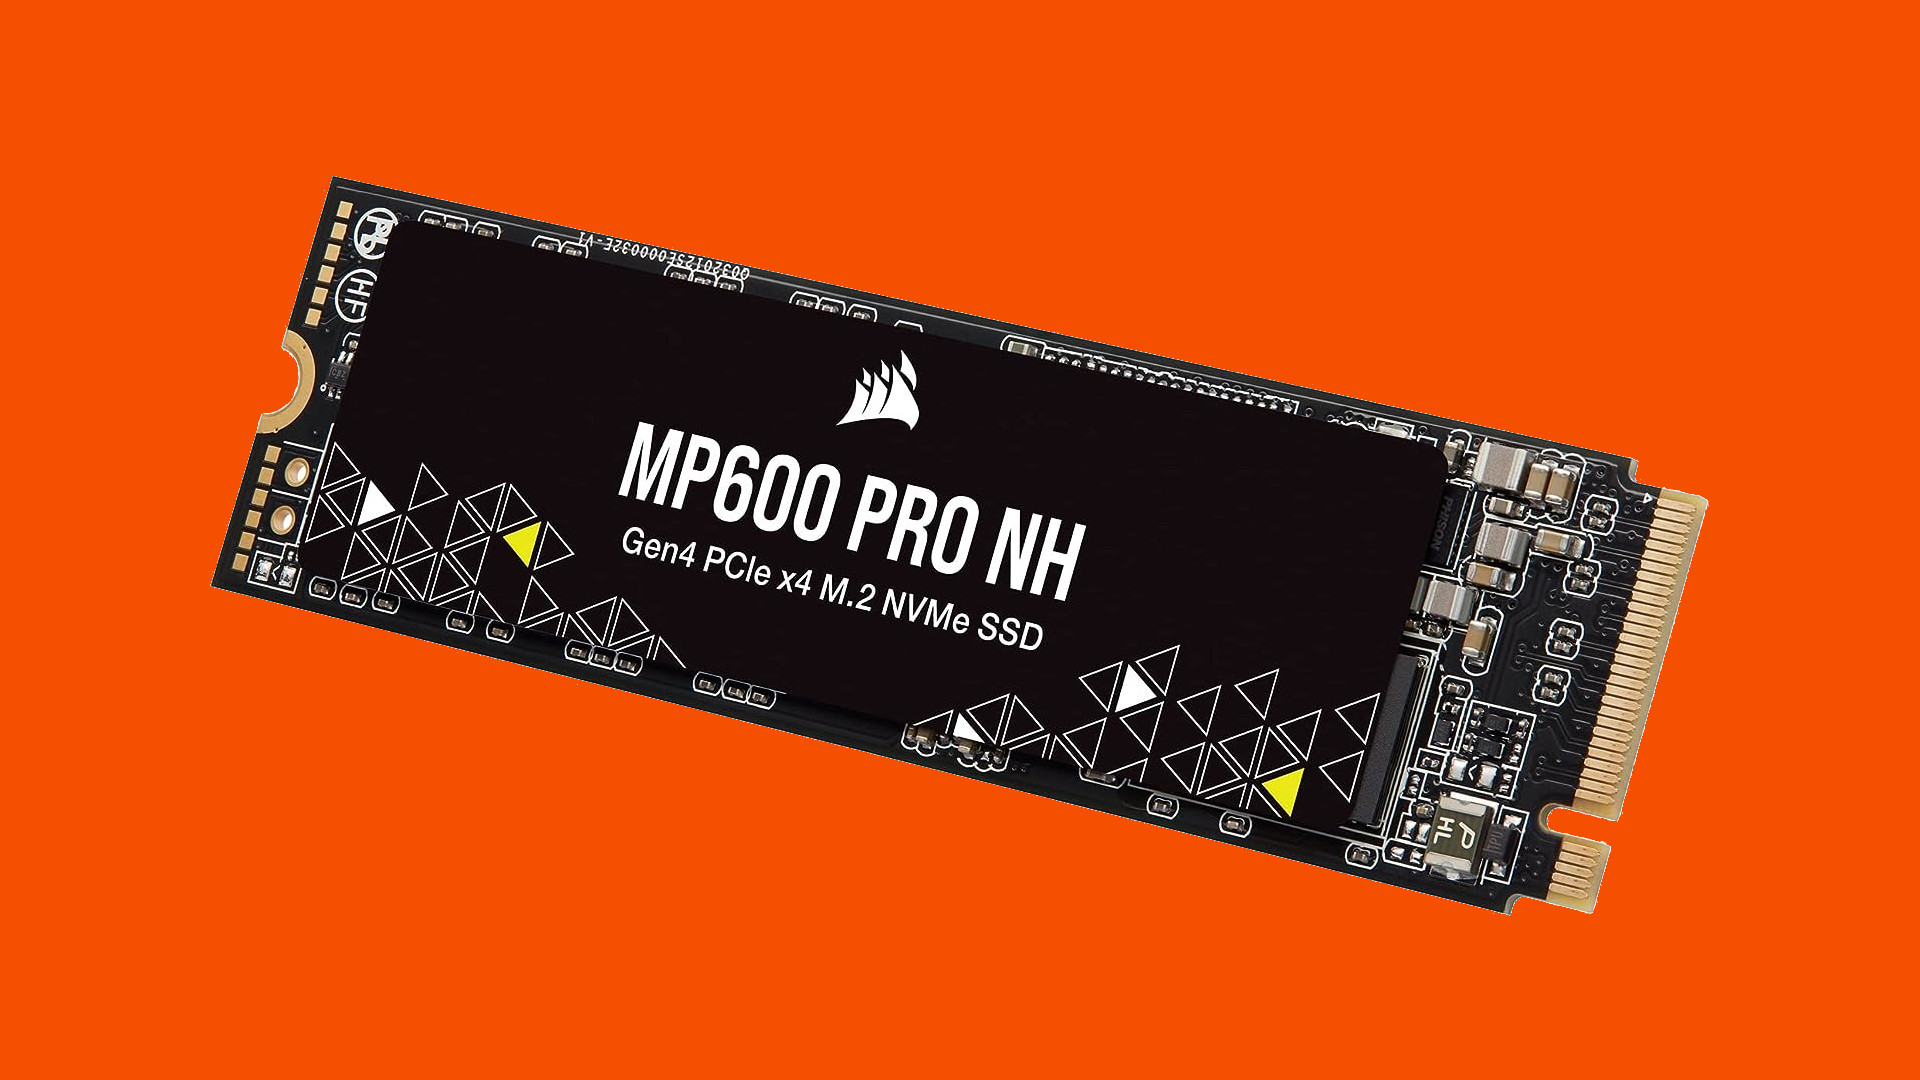 Grab the Corsair MP600 Pro NH SSD at its lowest ever price on